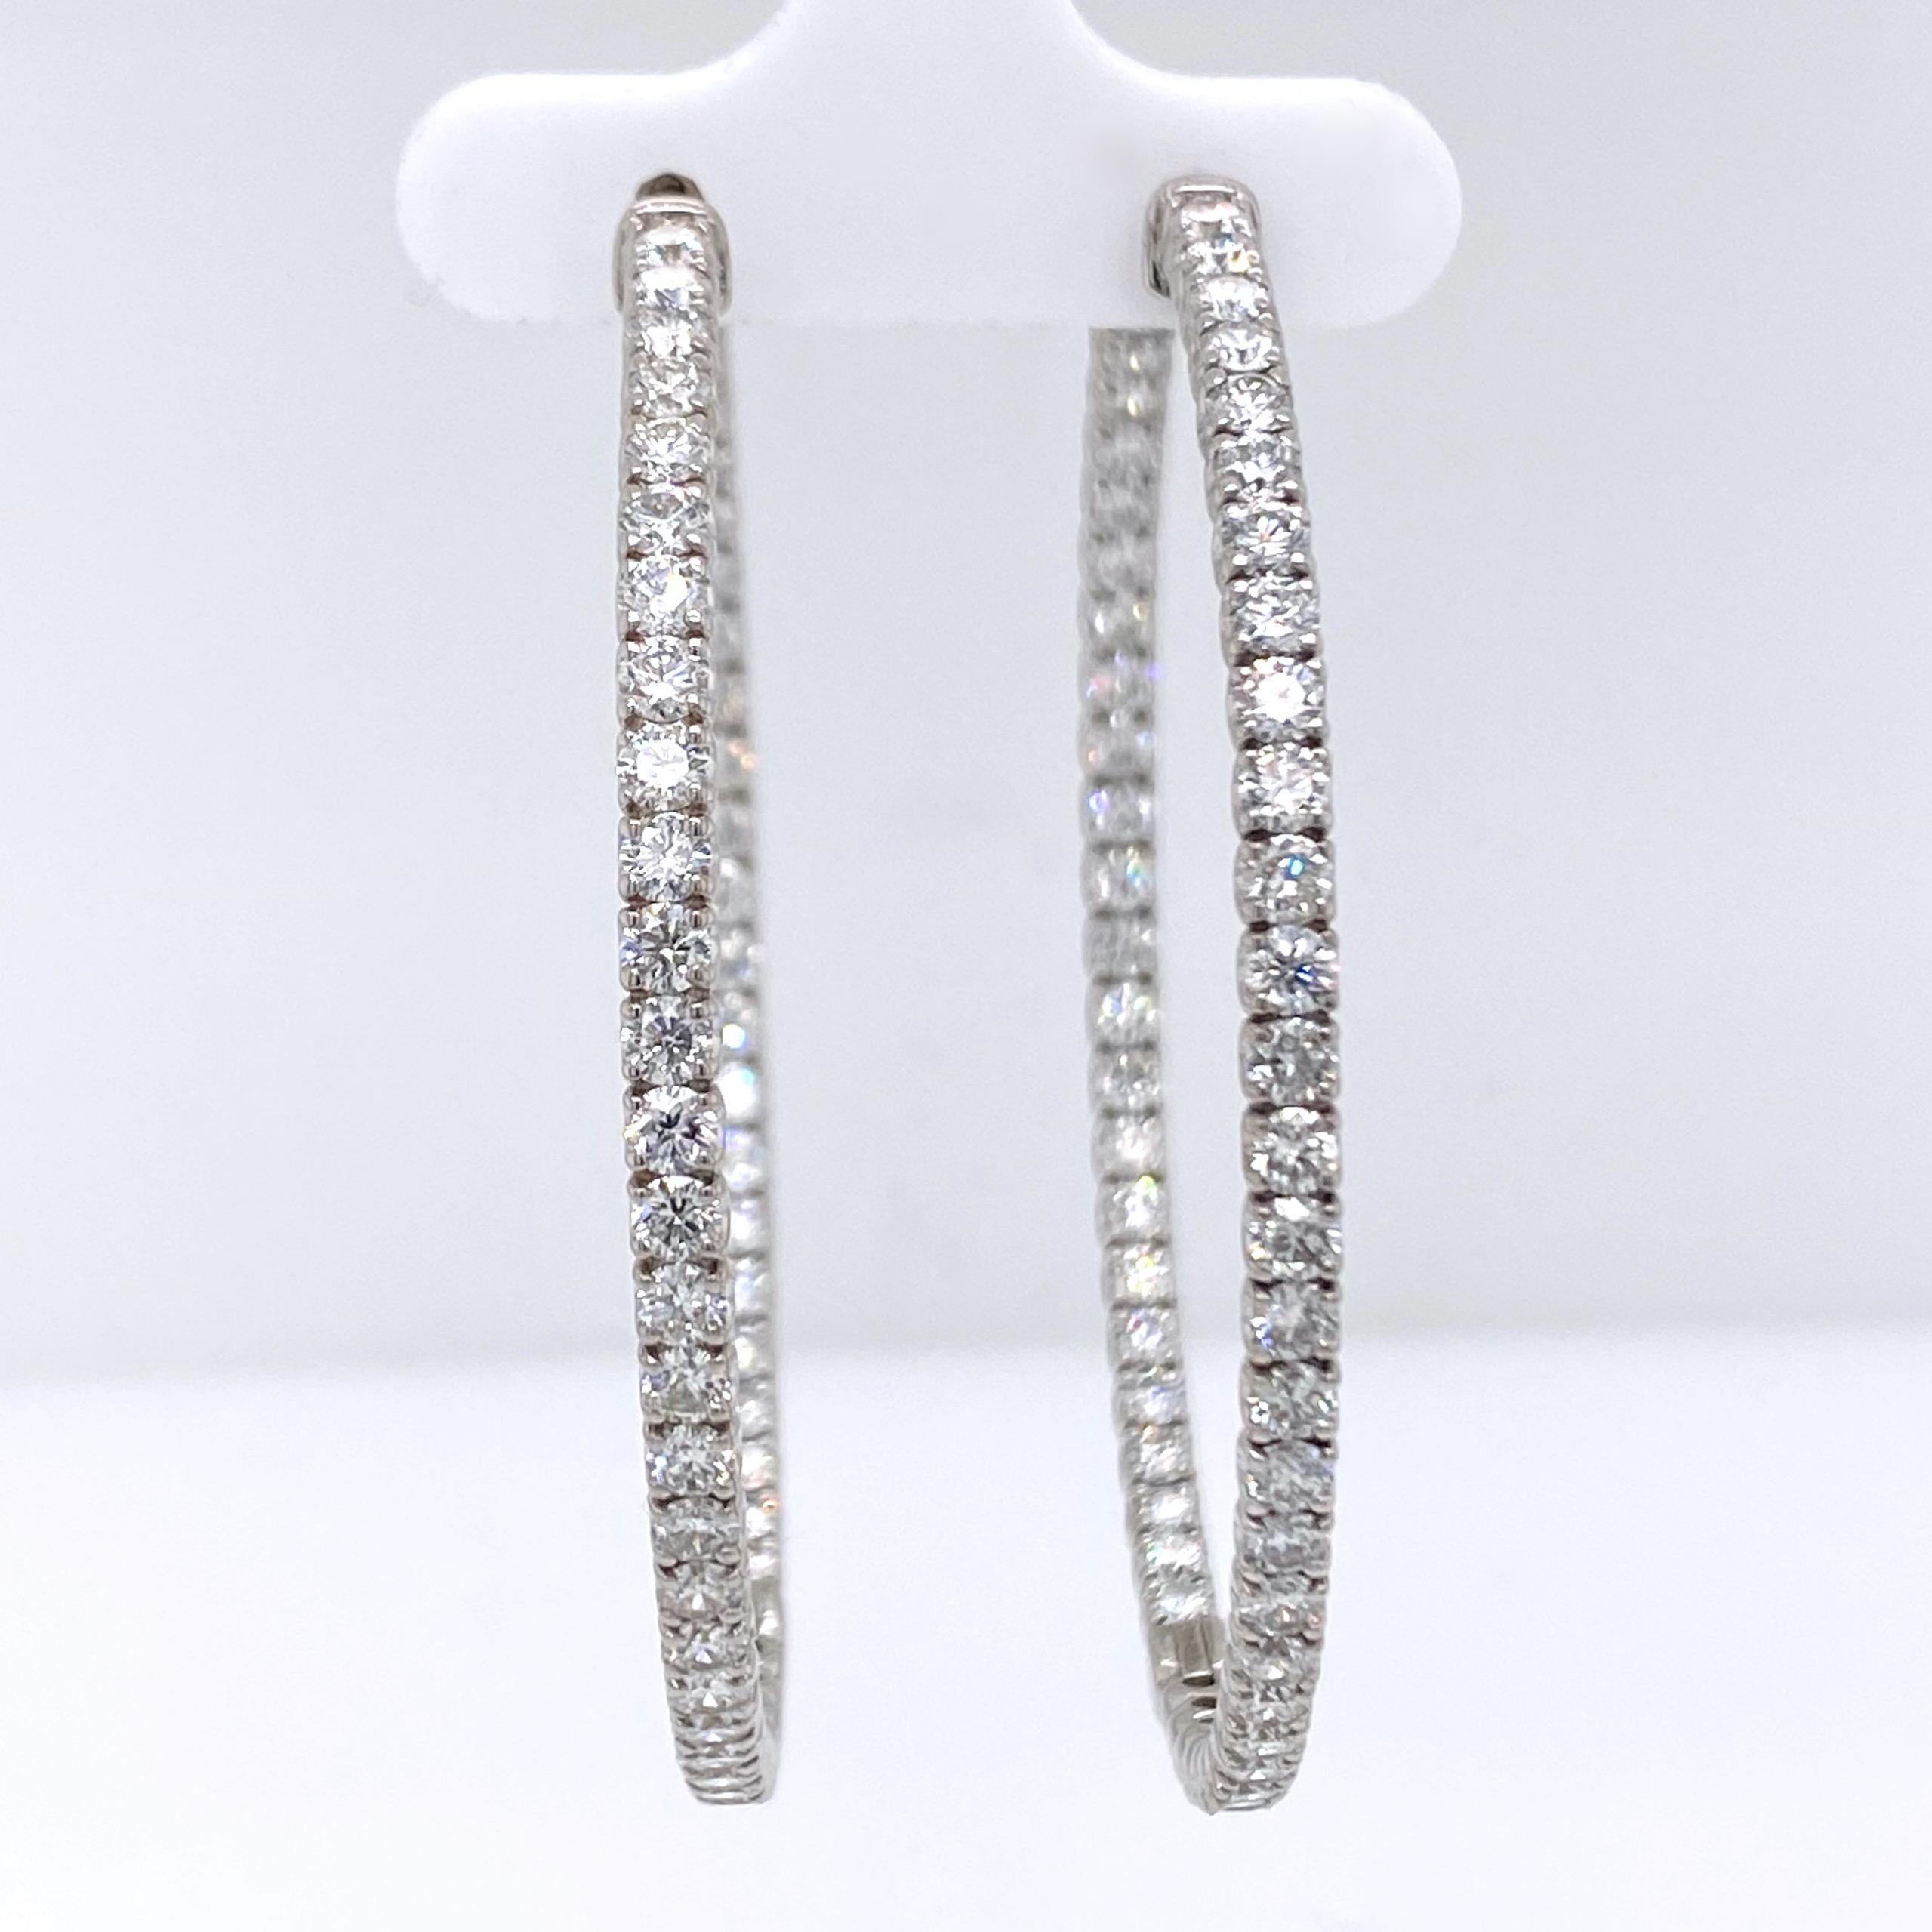 Diamond Hoop Earrings

Style:  Inside/Outside Diamond Hoops
Gold:  14K White Gold
TCW:  7.00 Carats Total Approximate
Diamond:  110 Round Brilliant Cut Diamonds 2.6mm
Color & Clarity:  F - G color, VS2 - SI2 clarity
Hallmark:  14K
Includes: 